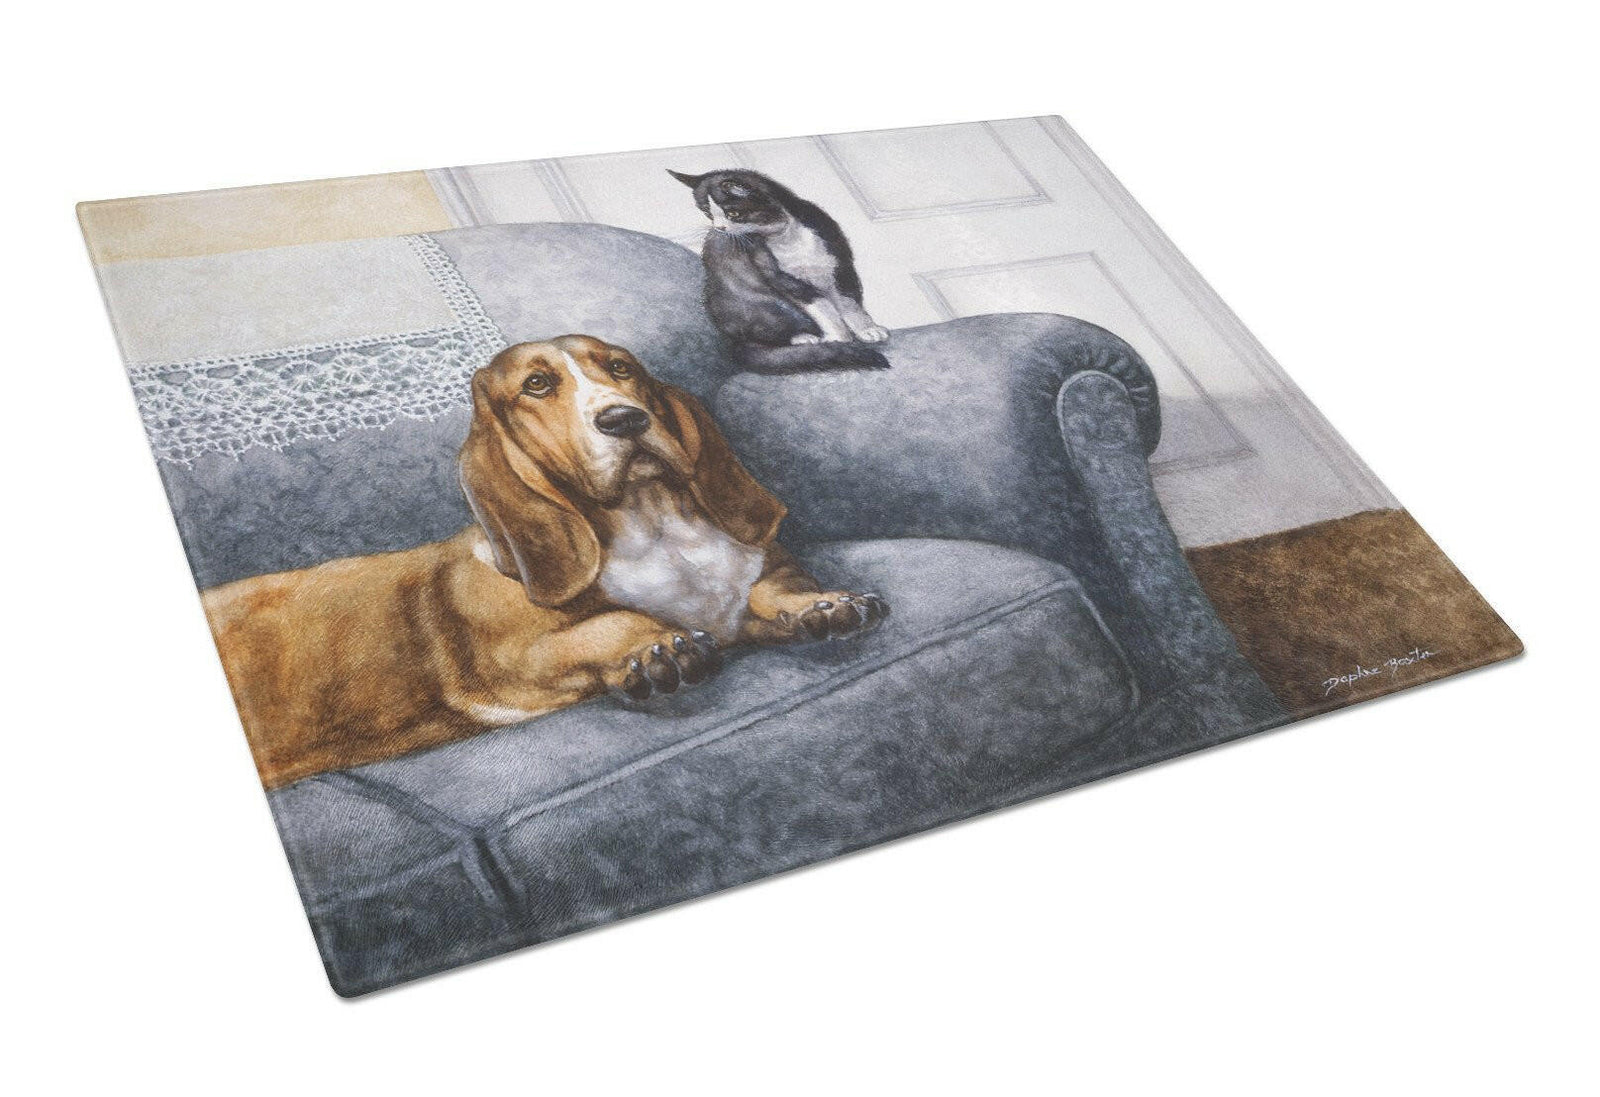 Basset Hound and Cat on couch Glass Cutting Board Large BDBA0182LCB by Caroline's Treasures